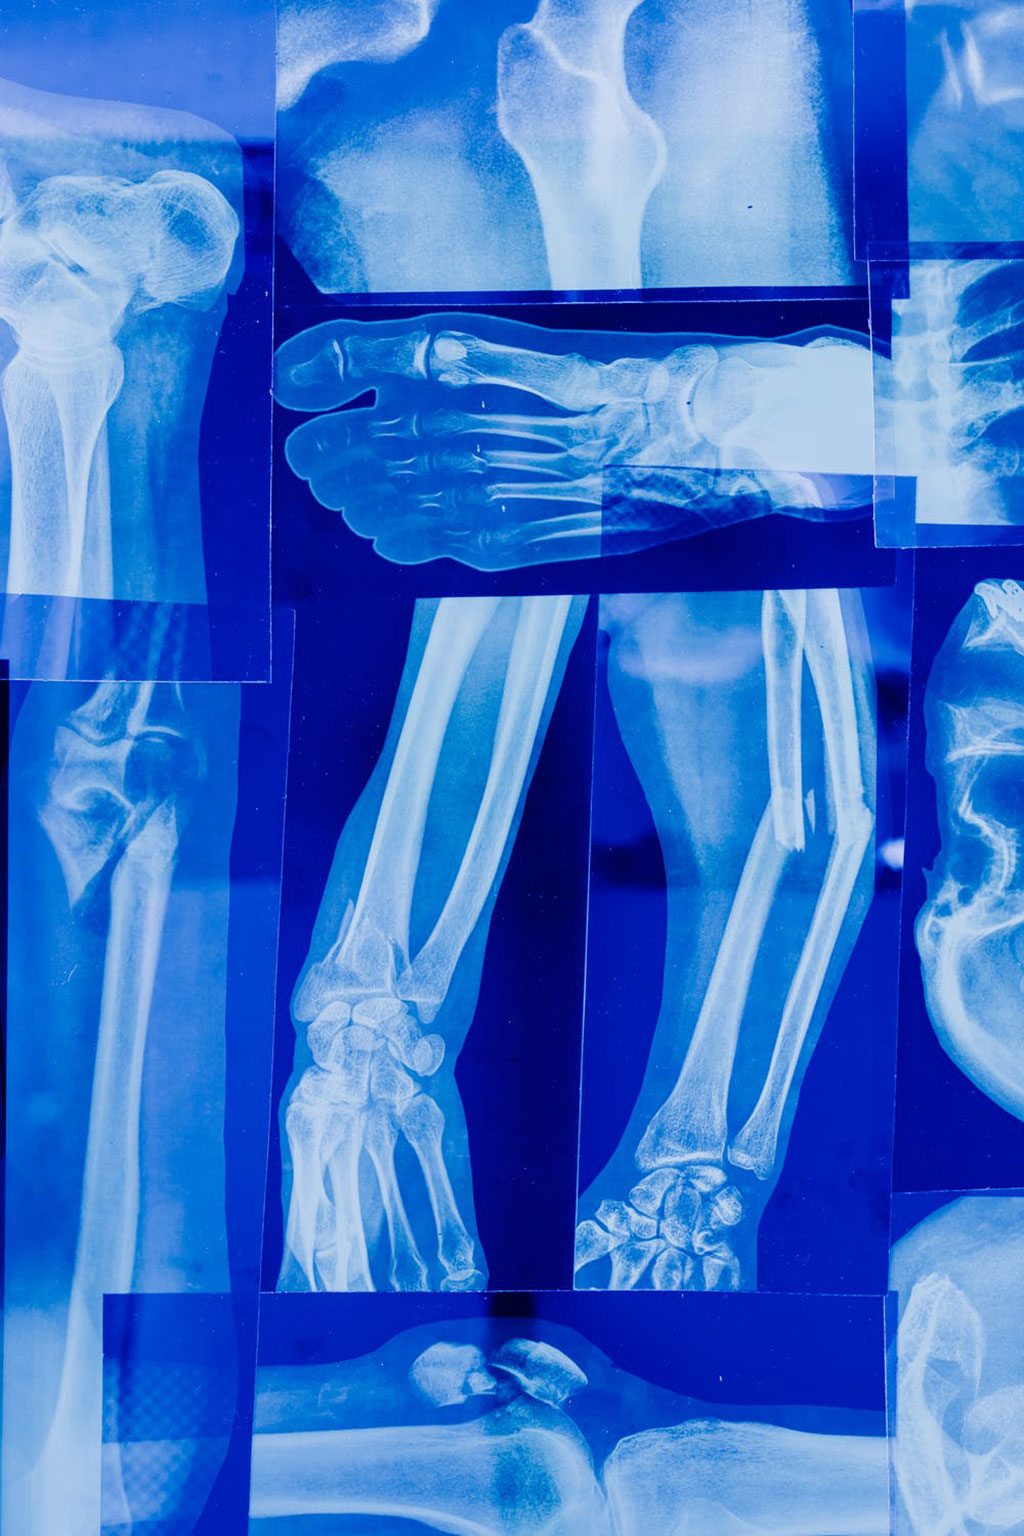 Image: Bioprinting for bone repair improves with genes (Photo courtesy of Pexels)